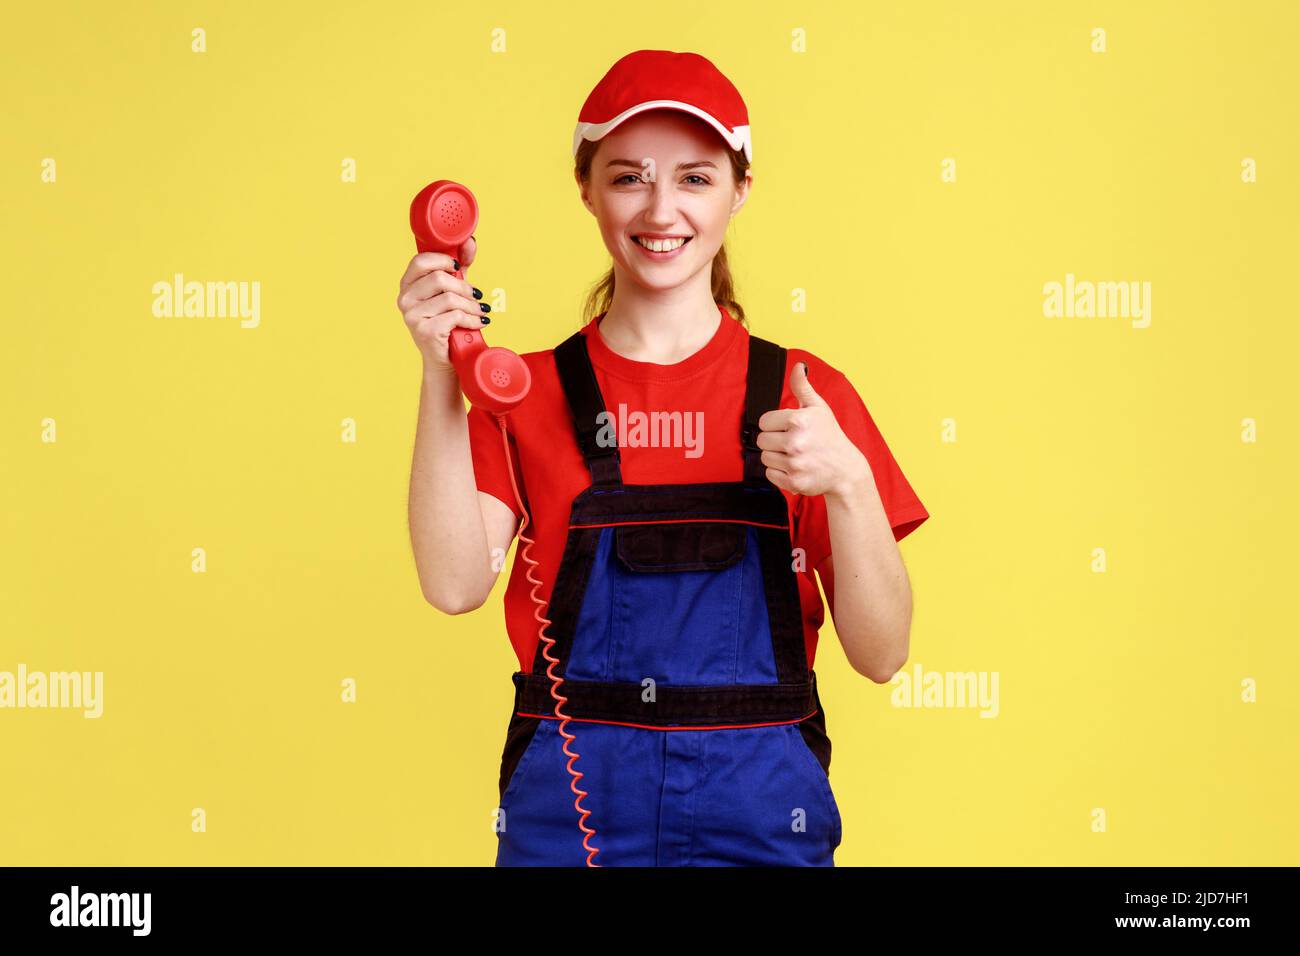 Portrait of delighted worker woman holding out handset, showing thumb up, likes order service, looking friendly at camera, wearing overalls and cap. Indoor studio shot isolated on yellow background. Stock Photo